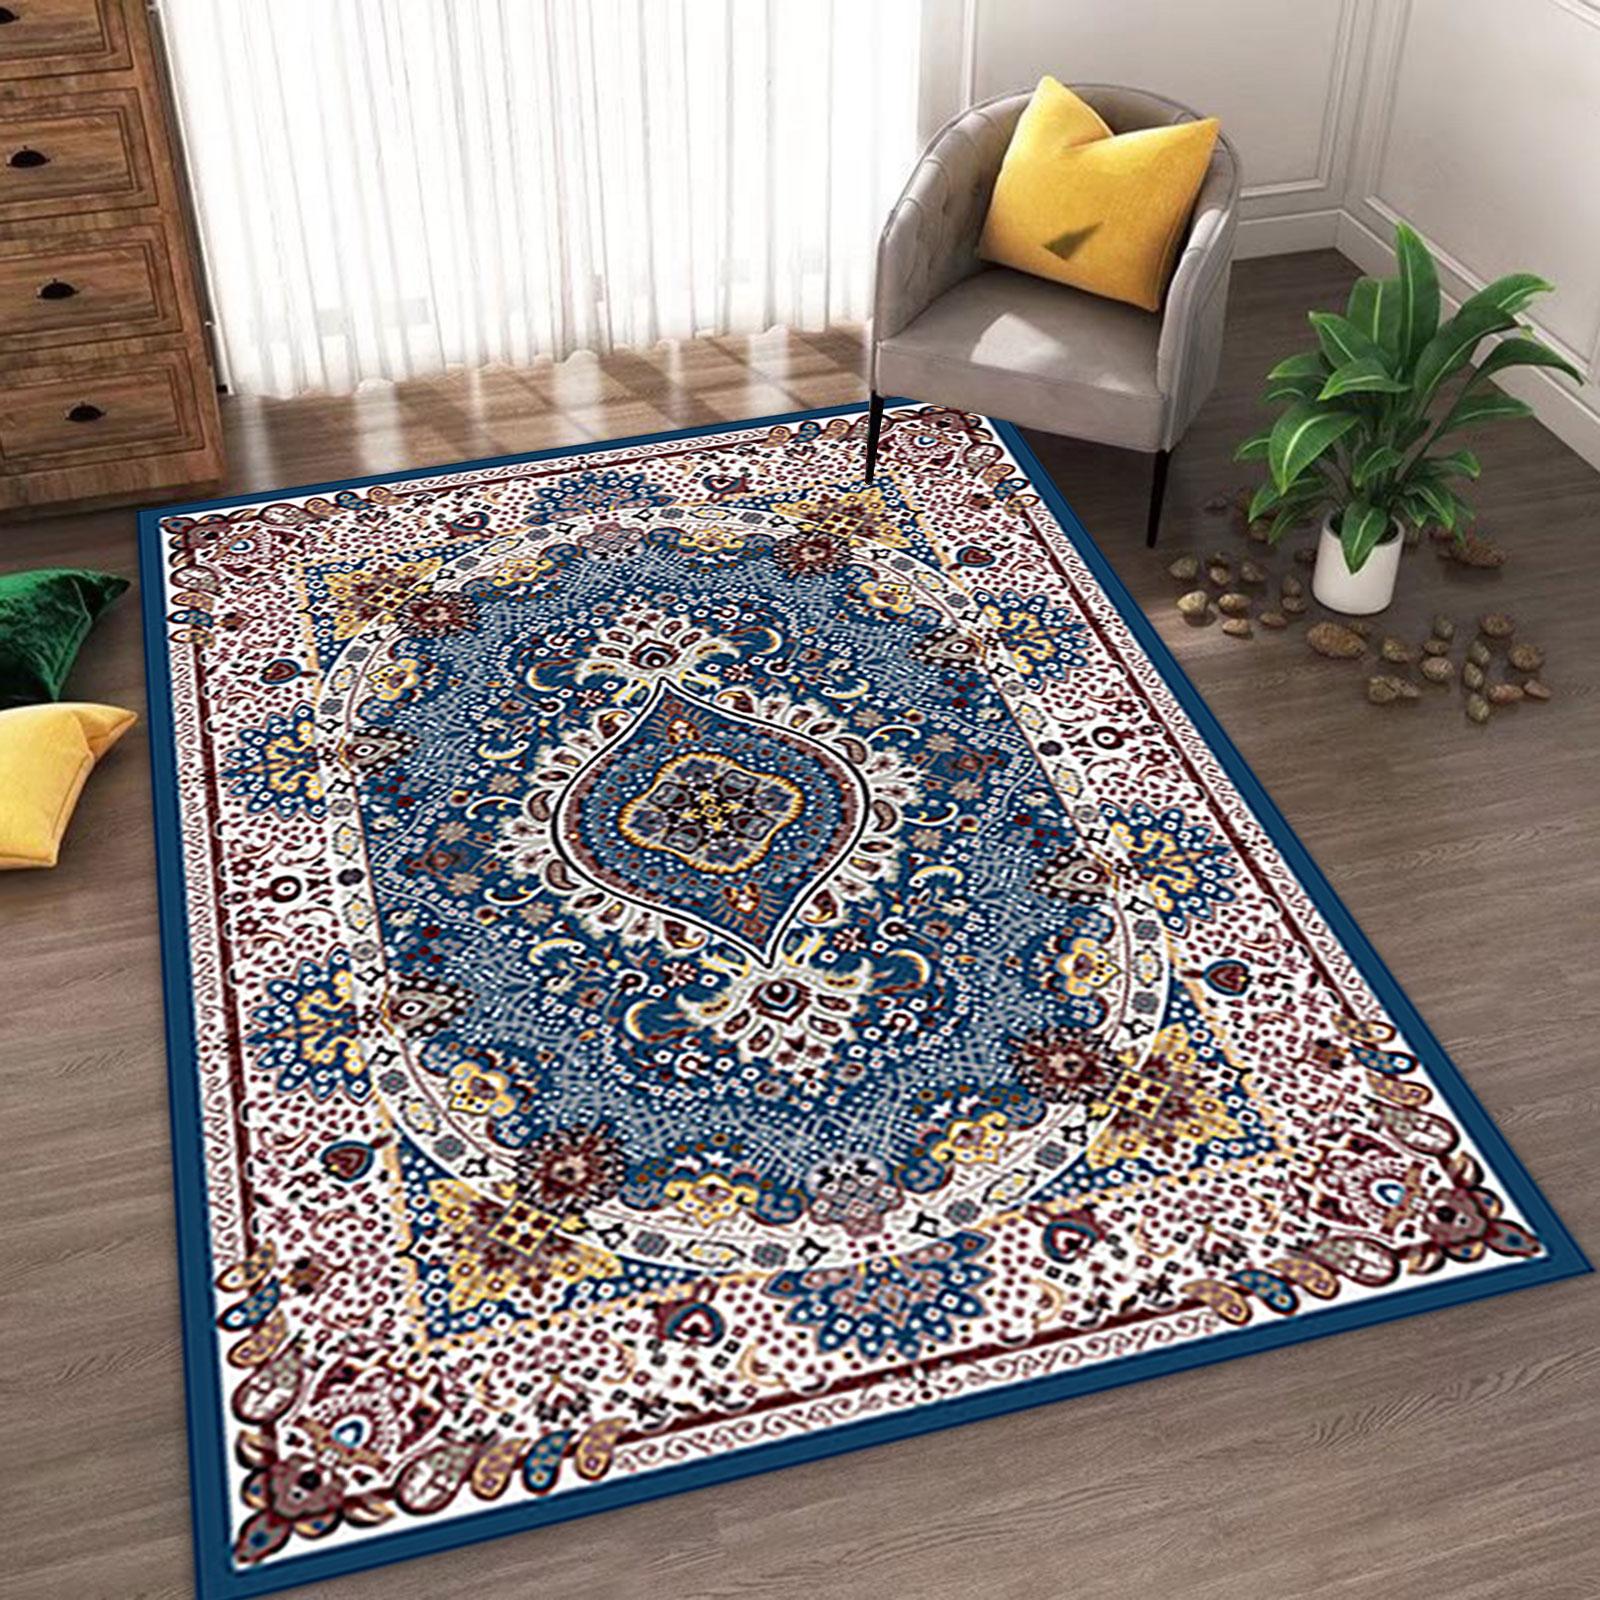 Area Rugs Bedroom 60cmx90cm Traditional Dining Table Non Skid Persian Carpet Style B